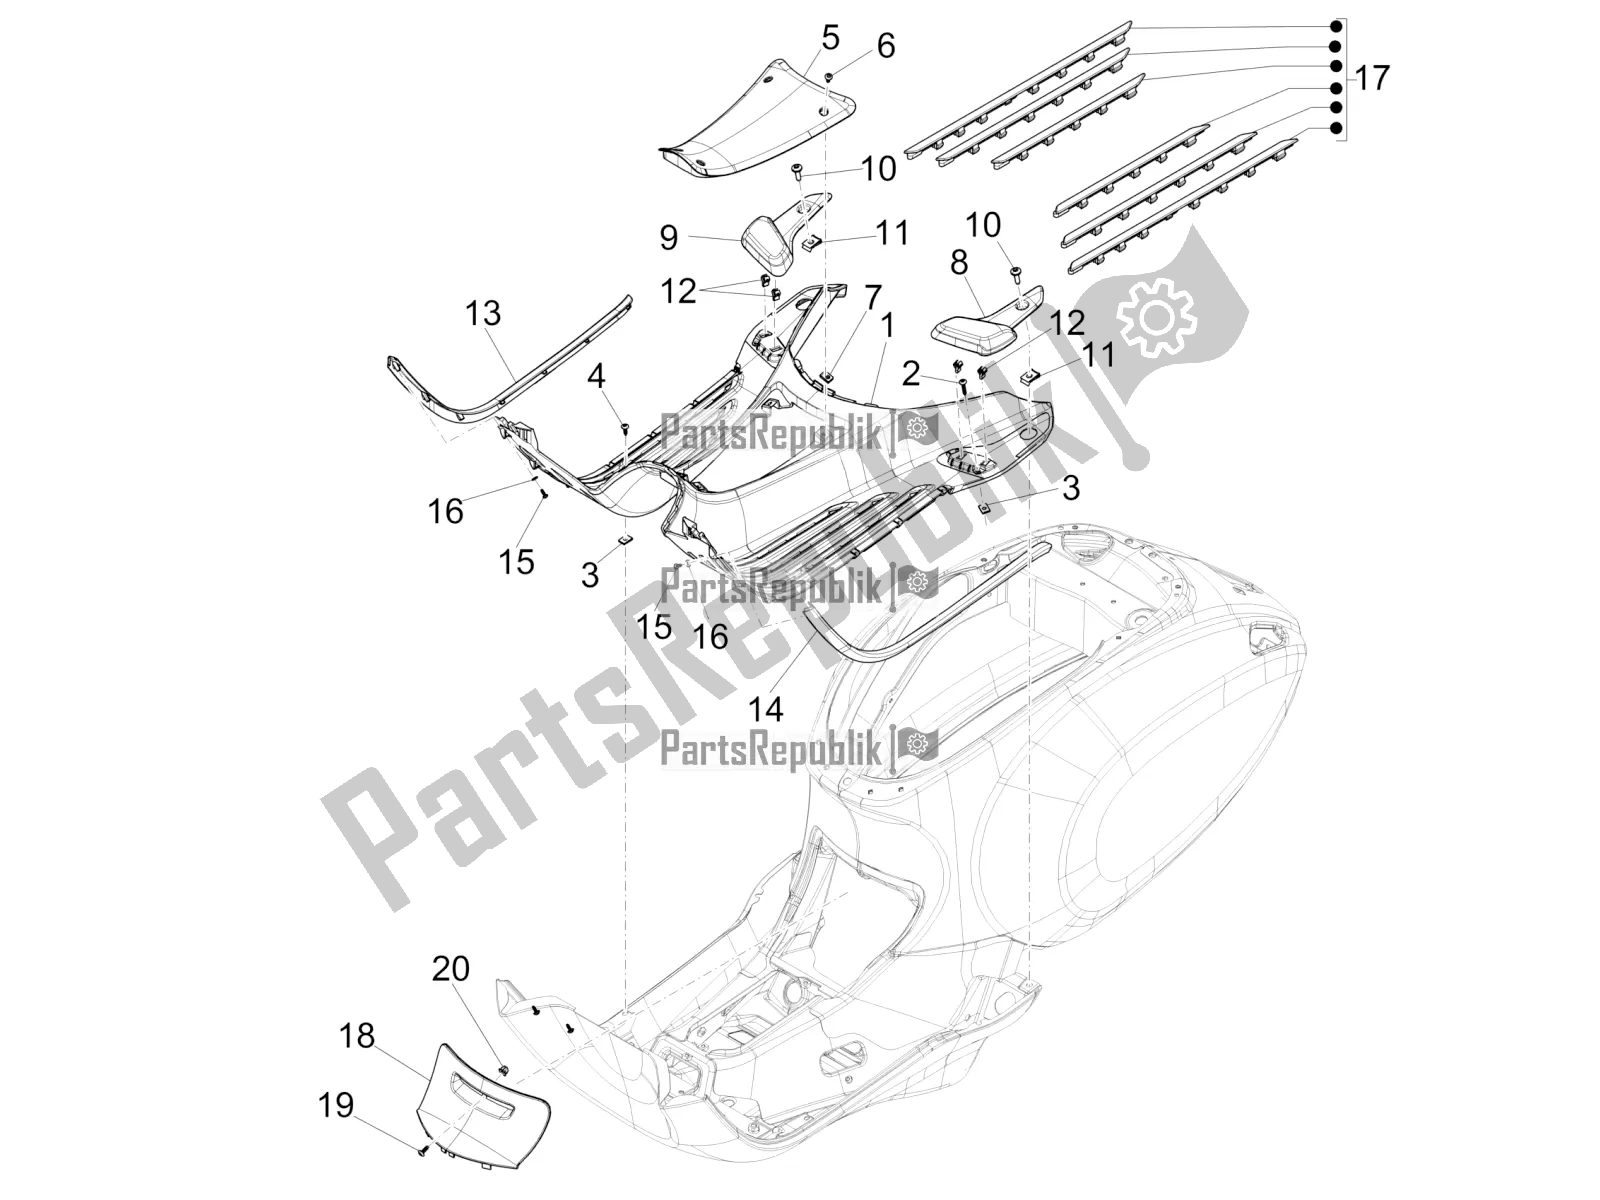 All parts for the Central Cover - Footrests of the Vespa Primavera 150 Iget ABS E5 2021